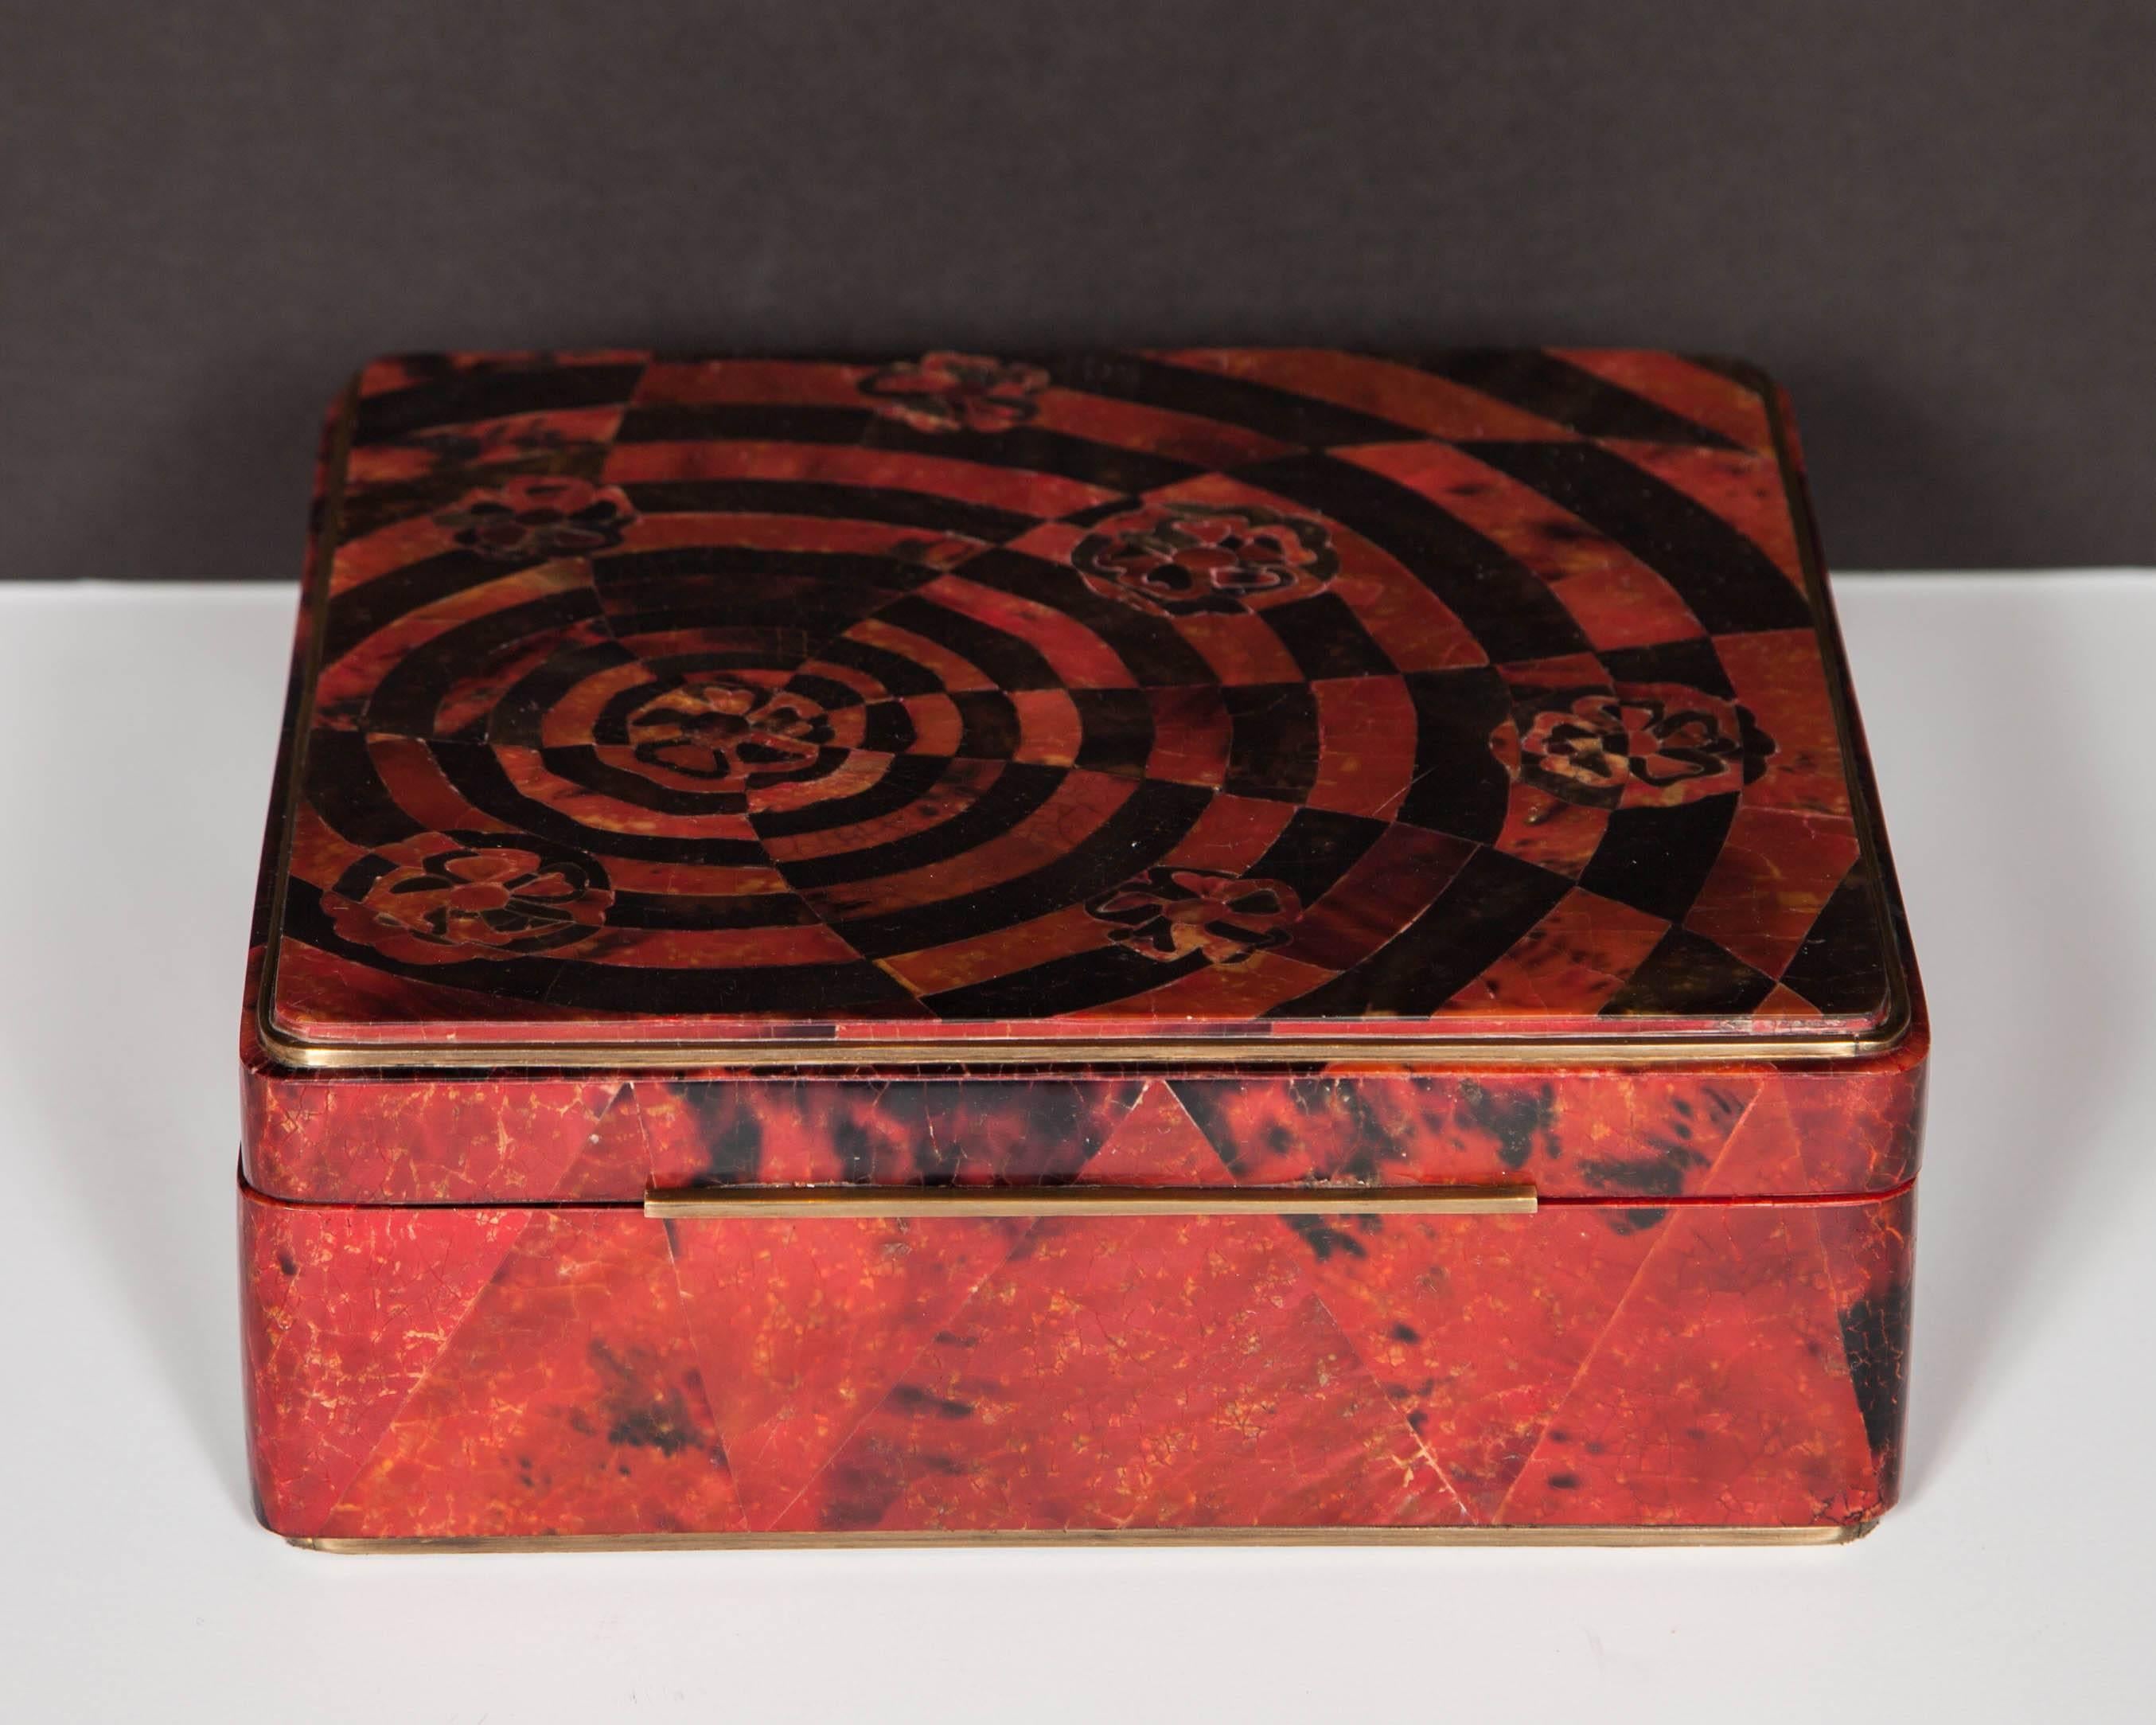 Mid-Century Modern Pen Shell Box in Ruby Red with Geometric Inlay Design